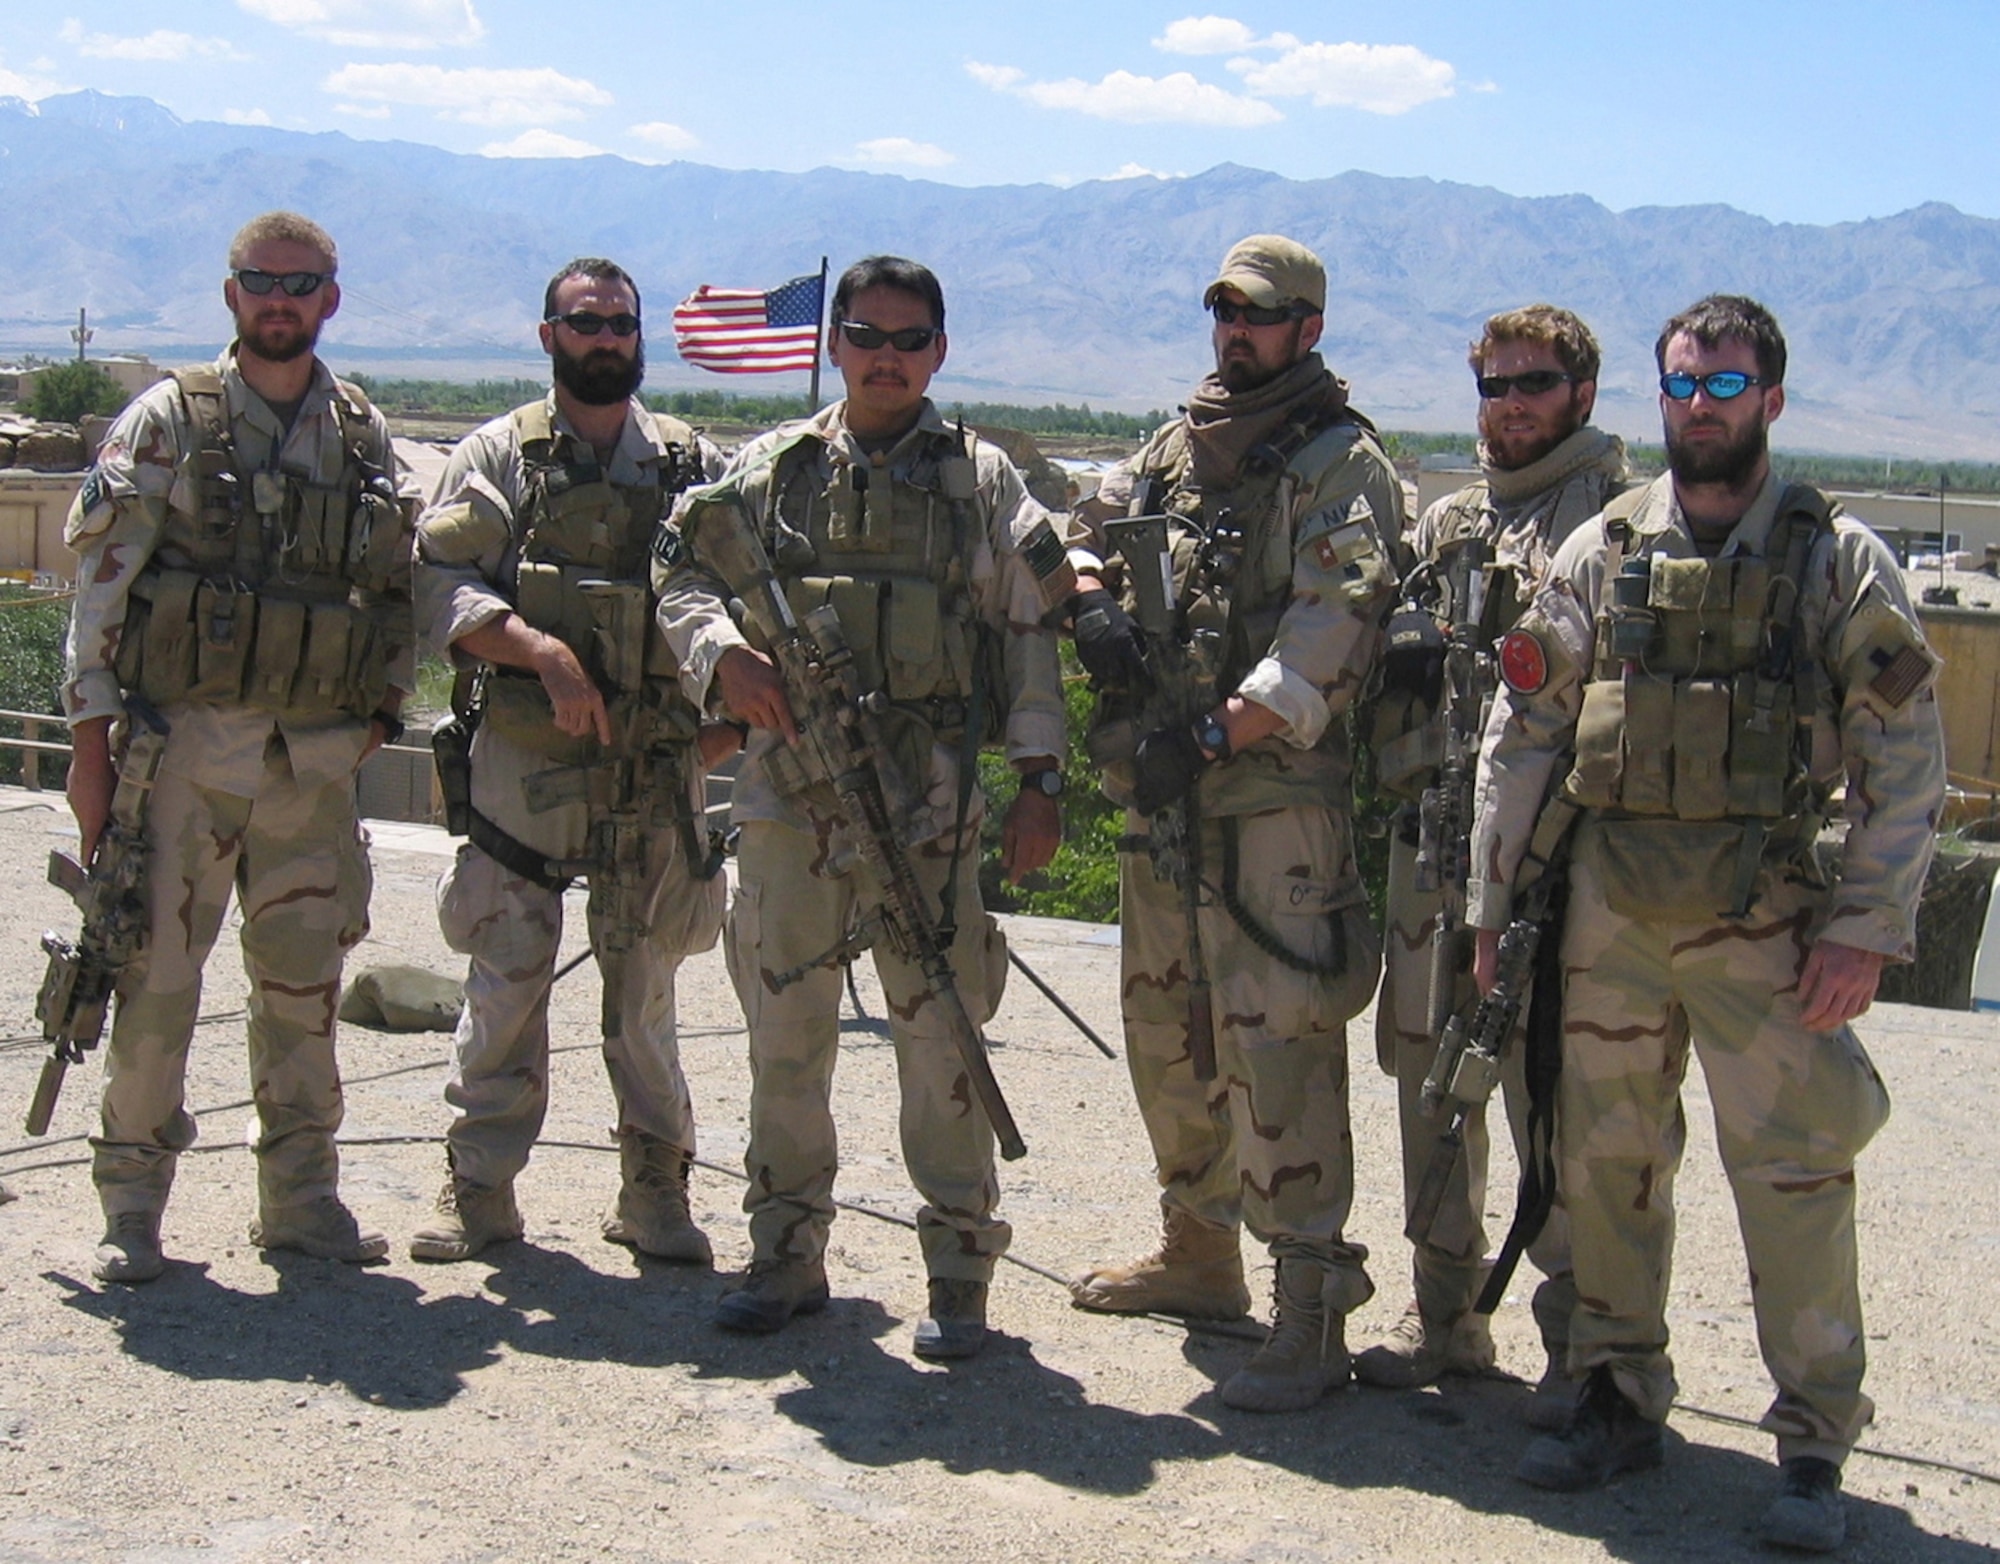 The heroes of Operation Red Wing in Afghanistan in 2005. From left to right, Sonar Technician (Surface) 2nd Class Matthew G. Axelson, of Cupertino, Calif; Senior Chief Information Systems Technician Daniel R. Healy, of Exeter, N.H.; Quartermaster 2nd Class James Suh, of Deerfield Beach, Fla.; Hospital Corpsman 2nd Class Marcus Luttrell, of Texas; Machinist's Mate 2nd Class Eric S. Patton, of Boulder City, Nev.; and Lt. Michael P. Murphy, of Patchogue, N.Y. With the exception of Luttrell, all were killed June 28, 2005, by enemy forces while supporting Operation Red Wing. (U.S. Navy photo)
